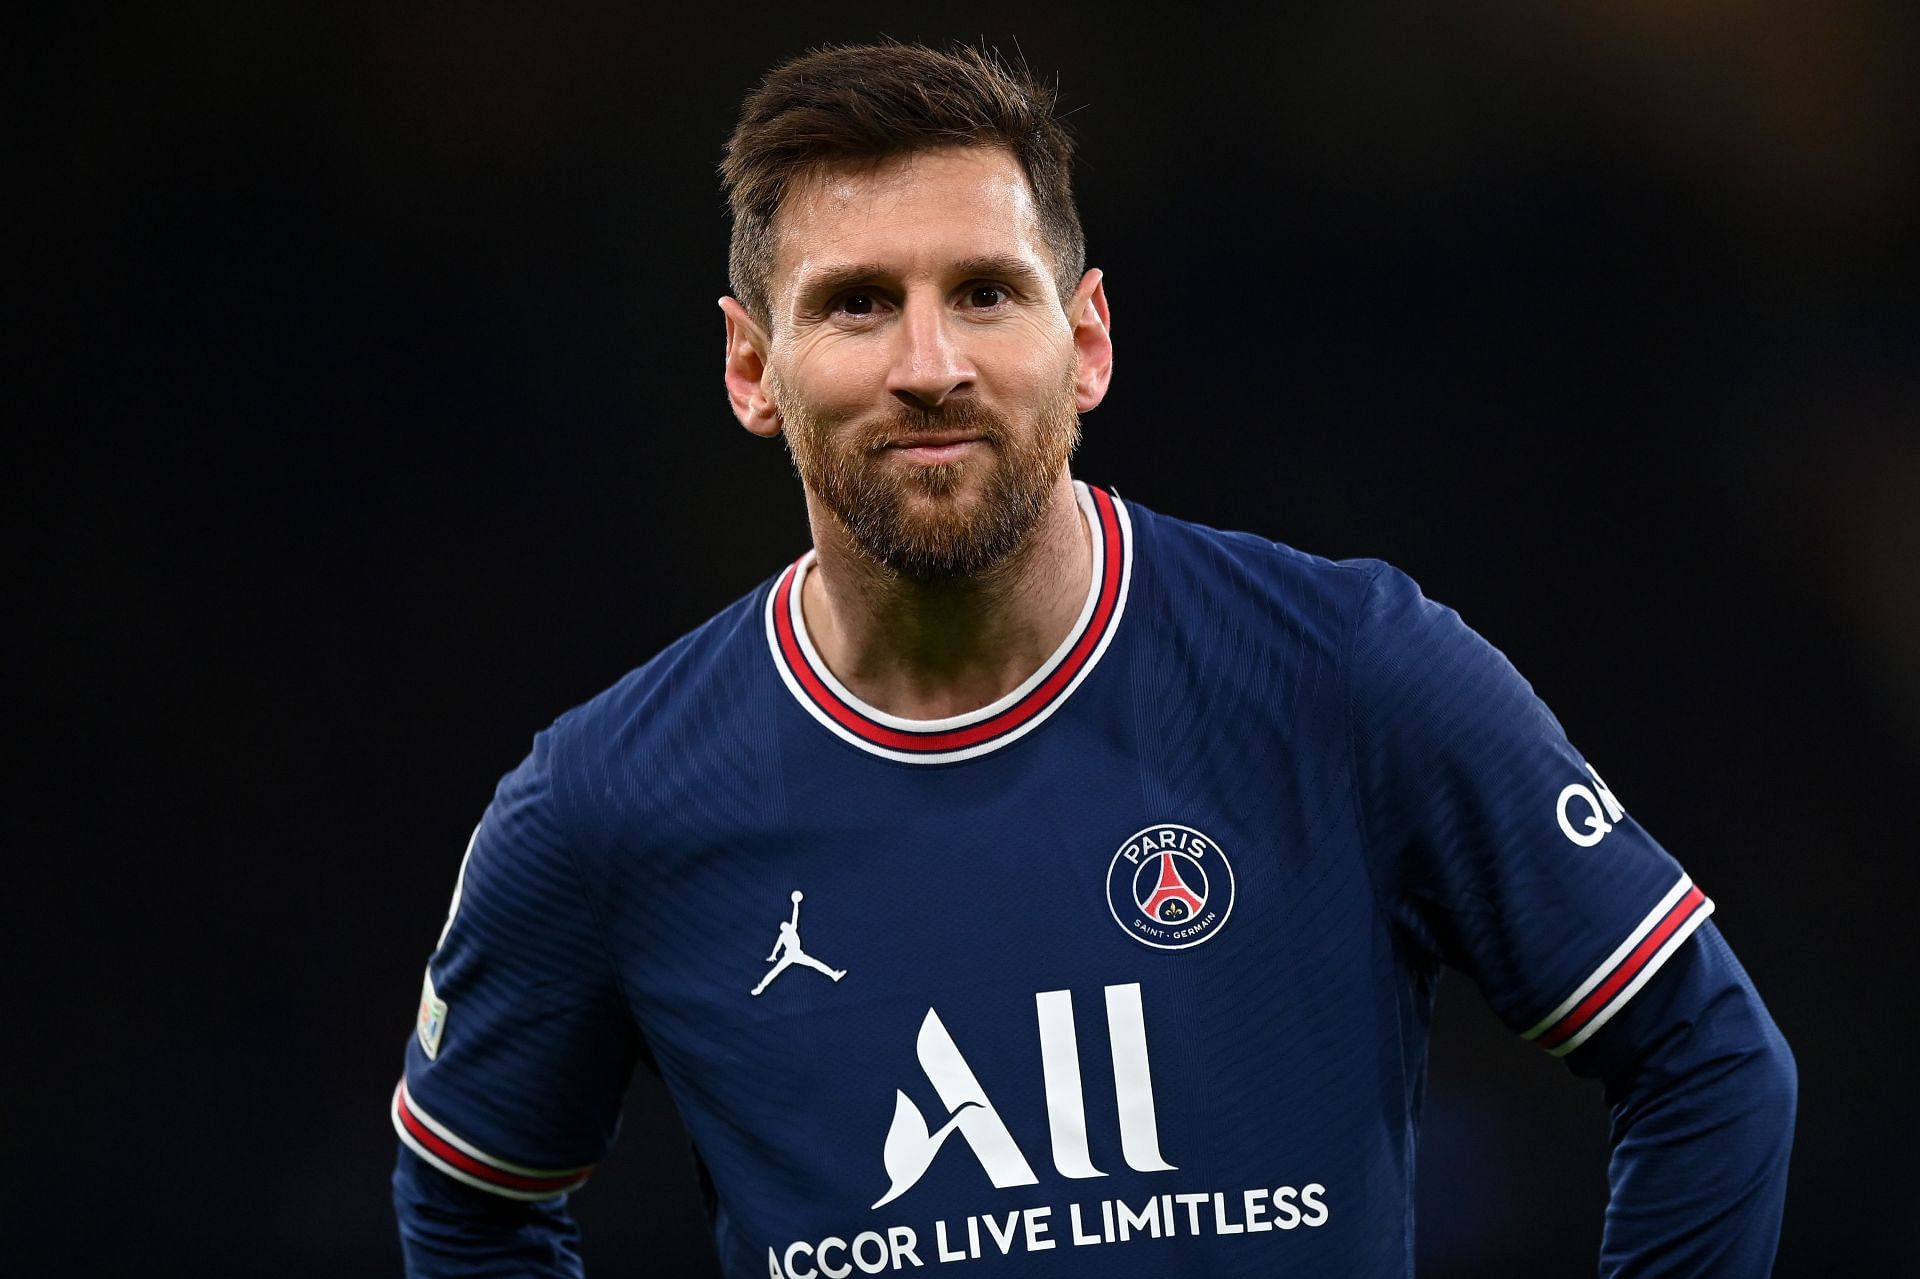 Mauricio Pochettino has confirmed that Lionel Messi will be available for selection against Reims.